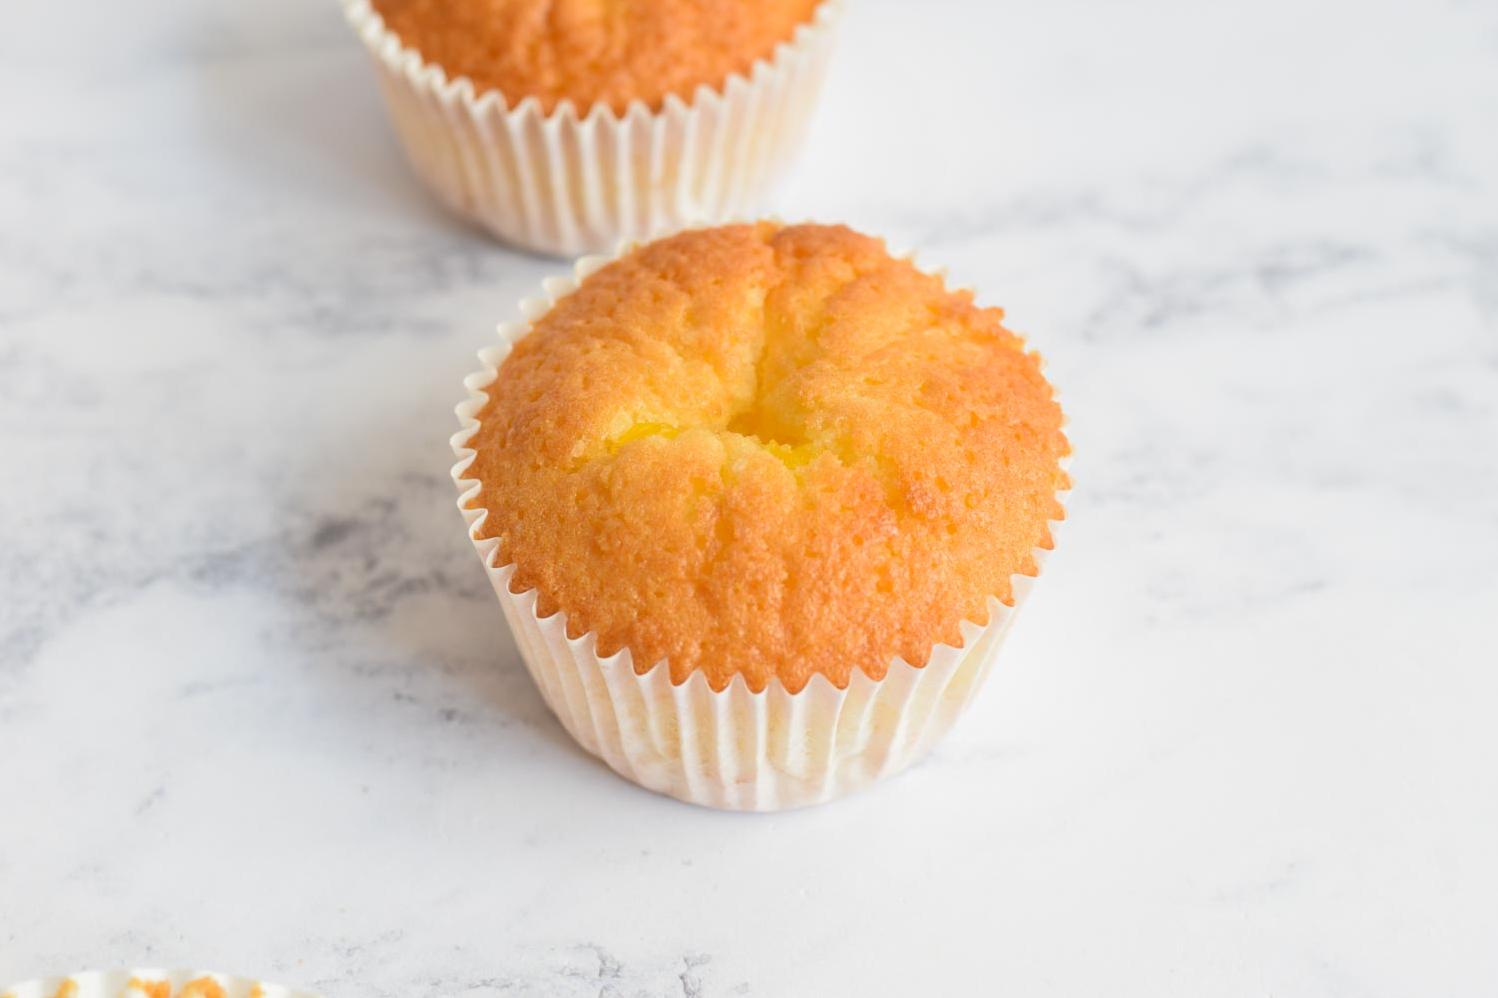  Perfectly baked and bursting with flavor, these cupcakes are a must-try.